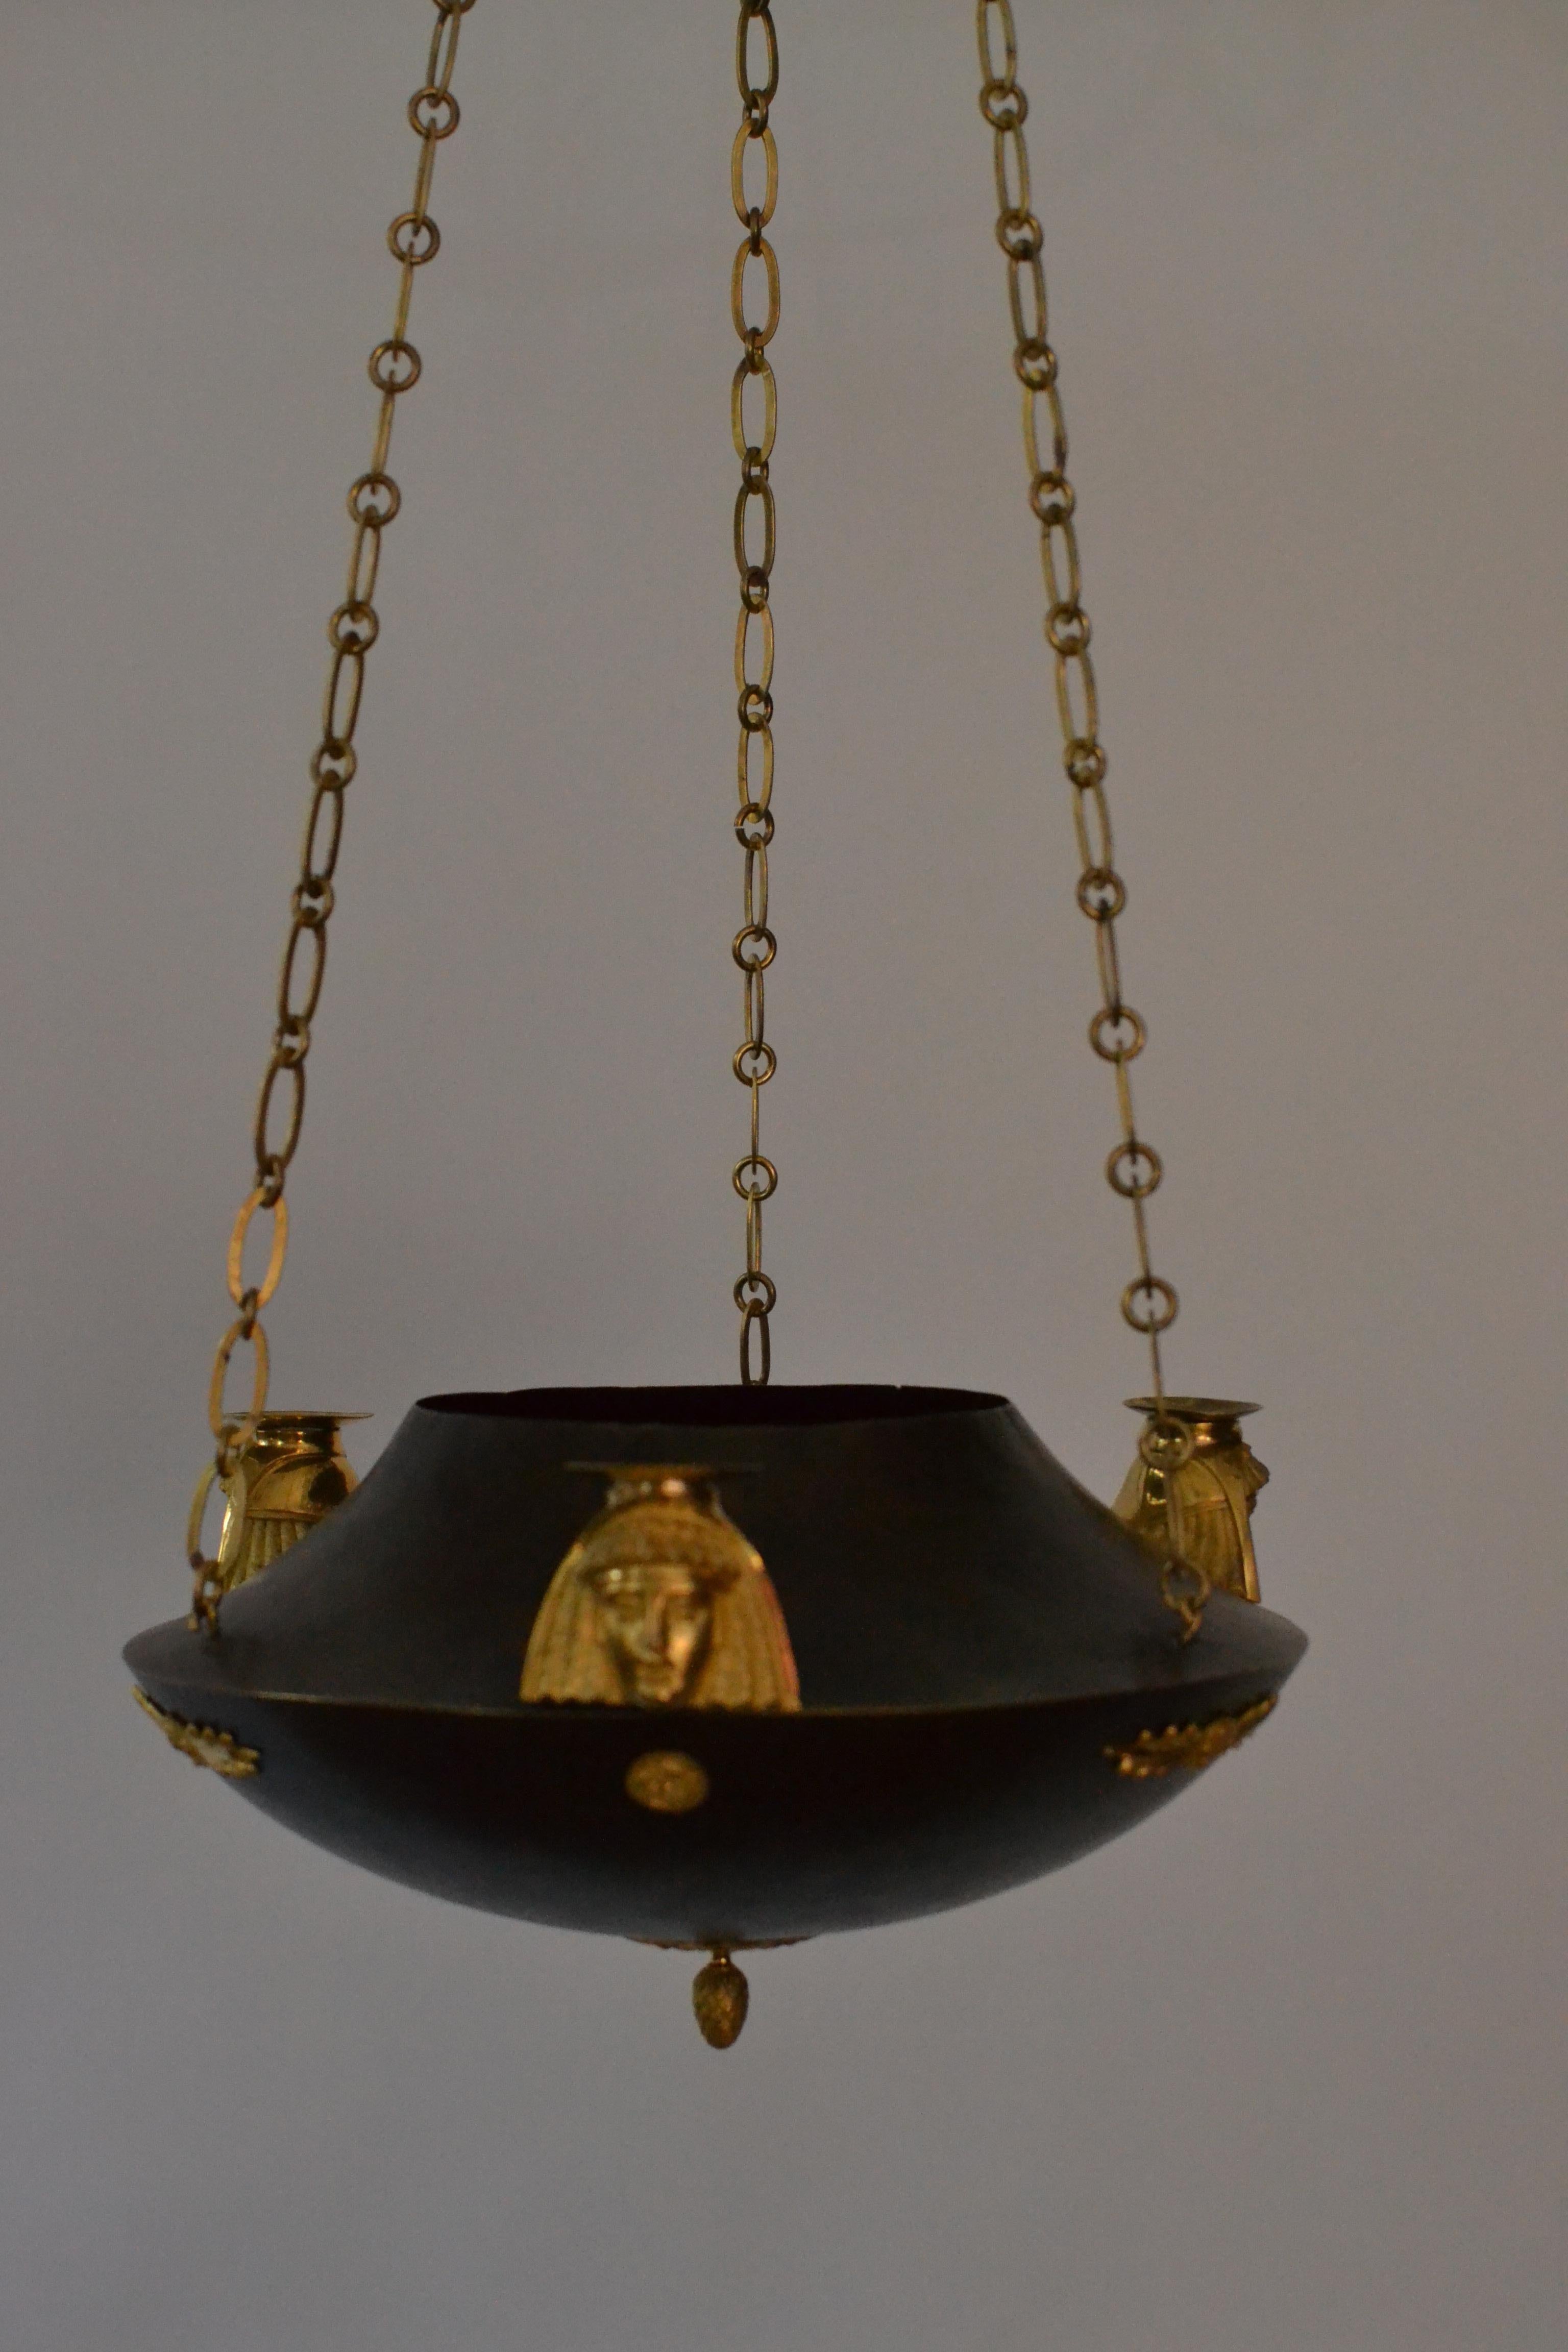 A Swedish empire lamp with three candleholders. The candleholders in the shape of Egyptian heads. Patinated copper and gilt bronze.